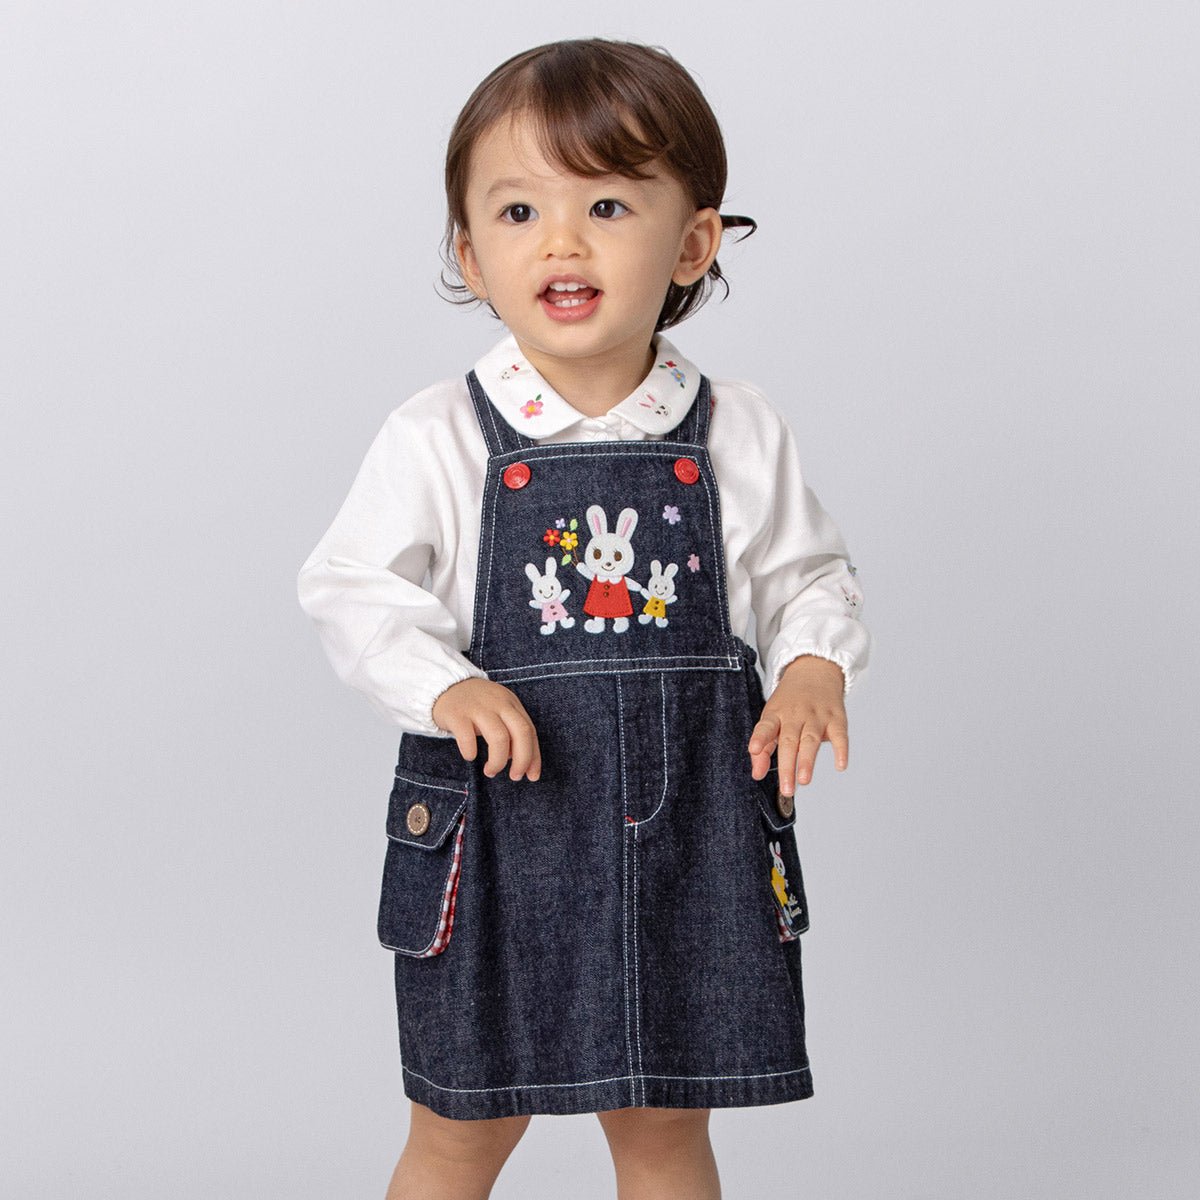 crazyfly Dungaree For Baby Boys & Baby Girls Printed Hosiery, Cotton Blend,  Denim Price in India - Buy crazyfly Dungaree For Baby Boys & Baby Girls  Printed Hosiery, Cotton Blend, Denim online